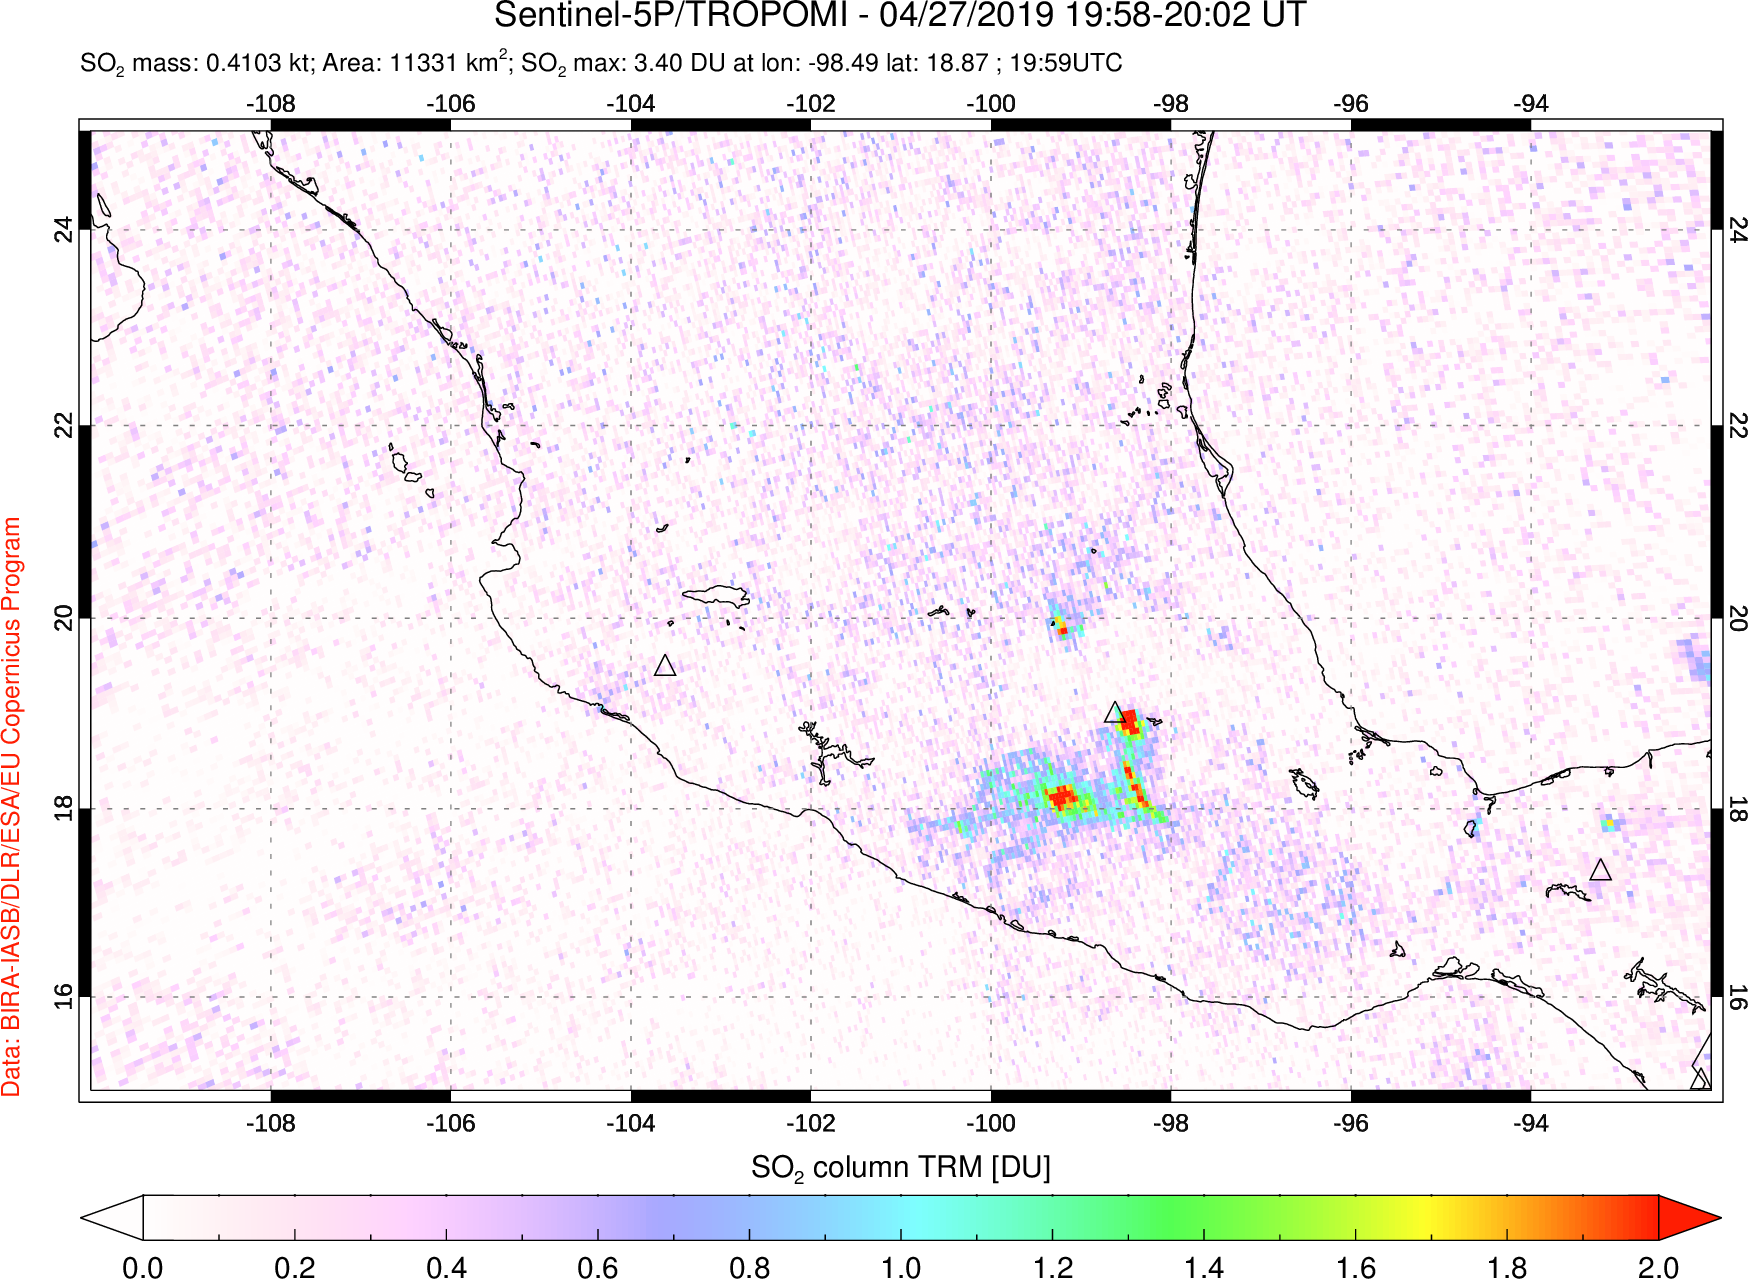 A sulfur dioxide image over Mexico on Apr 27, 2019.